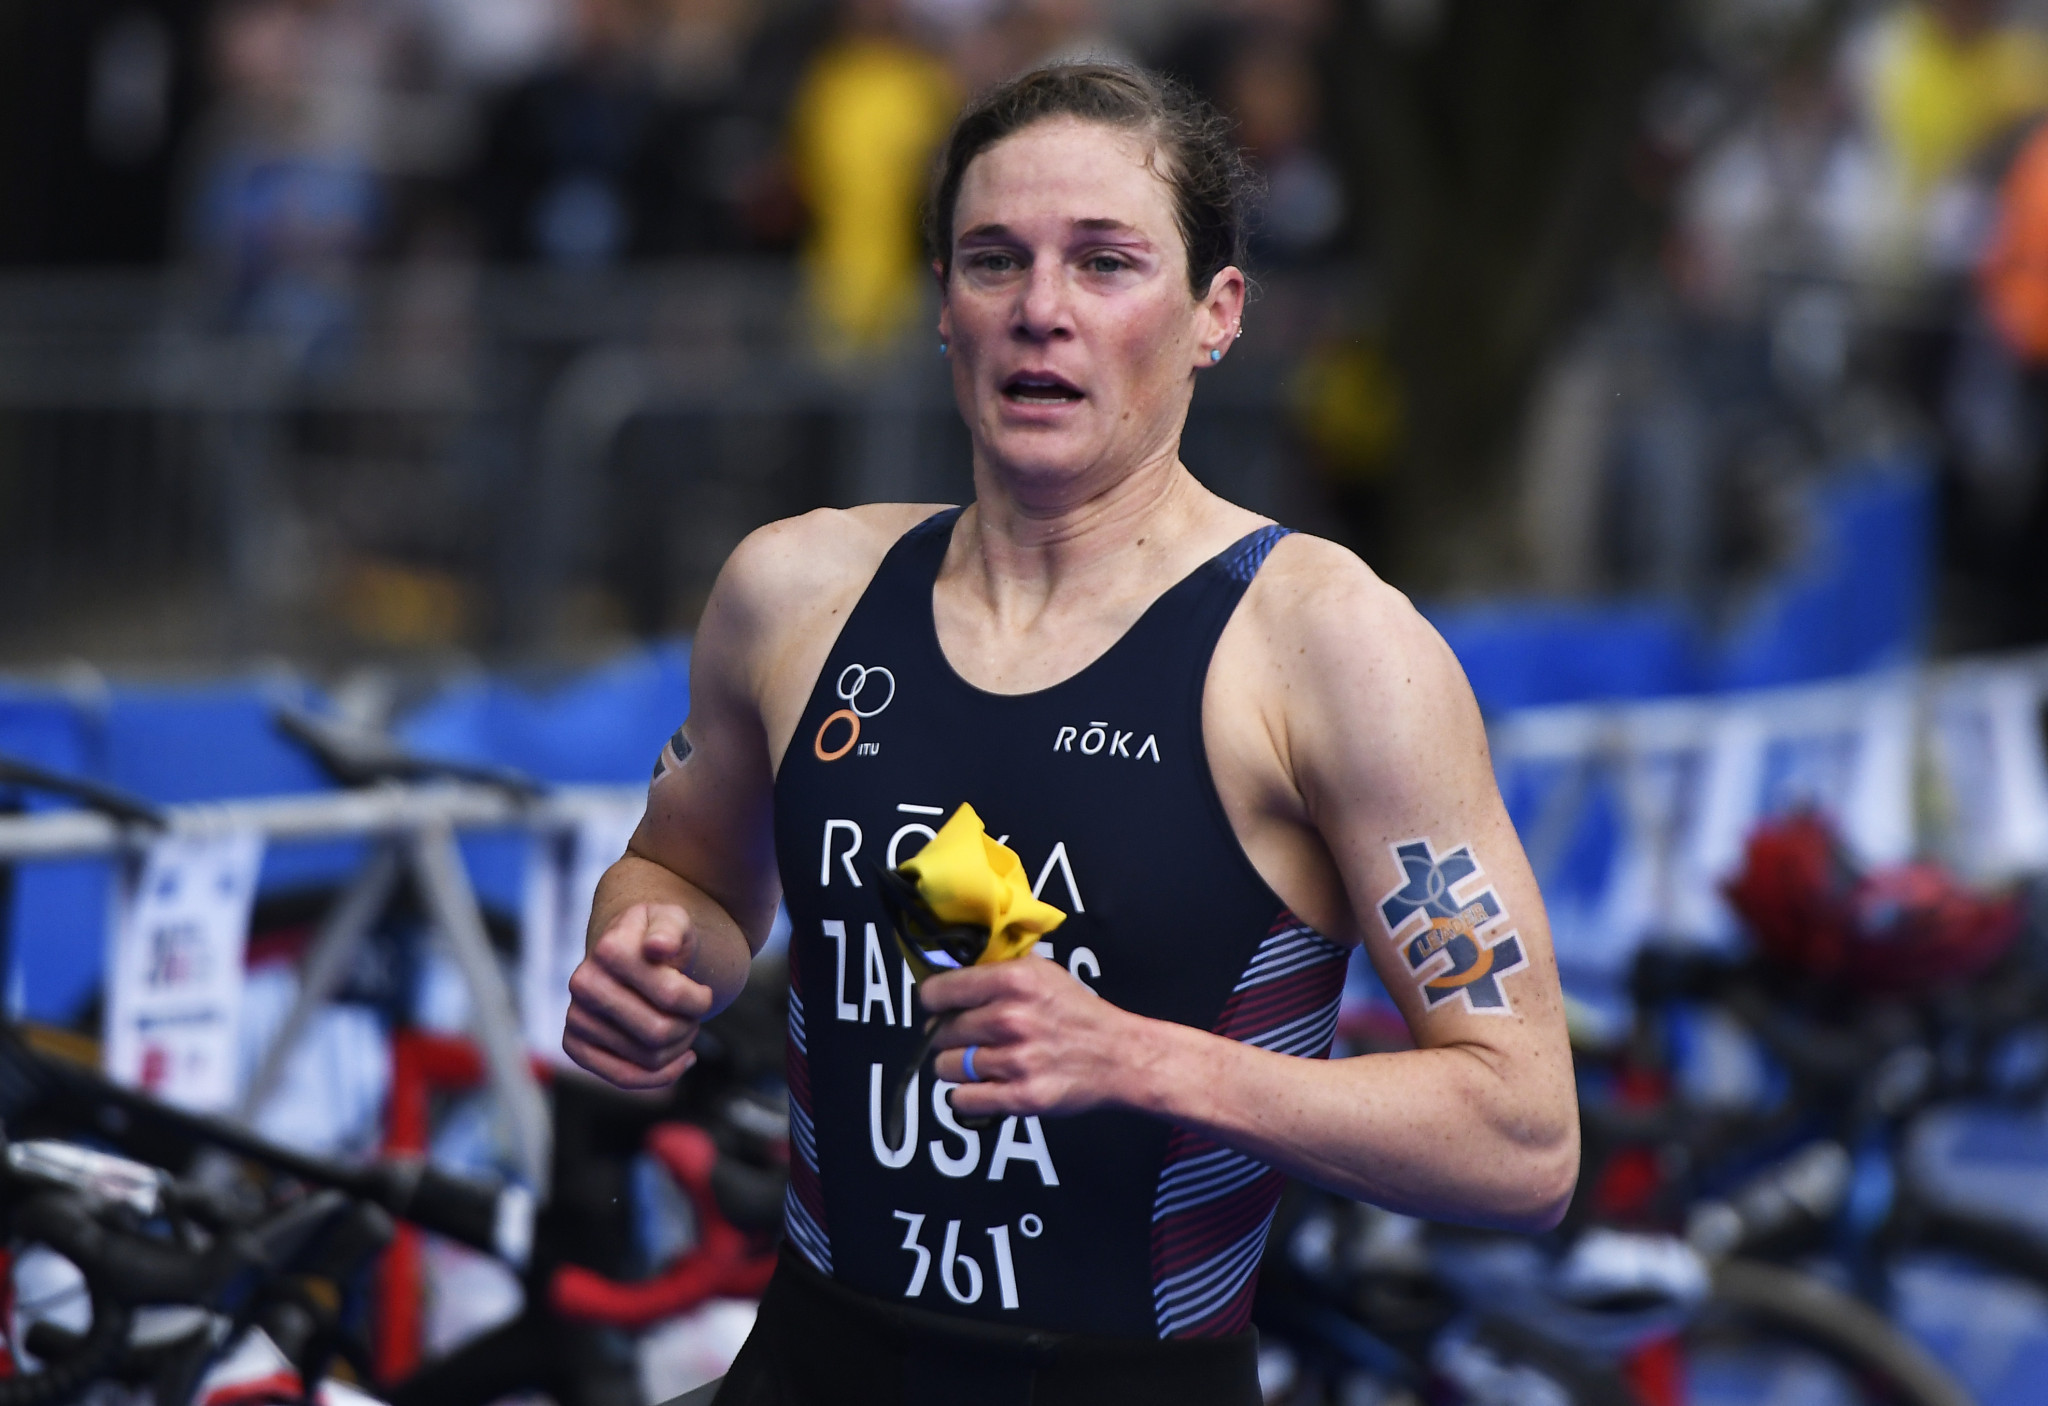 Katie Zaferes will aim to stretch her lead in the World Triathlon Series standings ©Getty Images